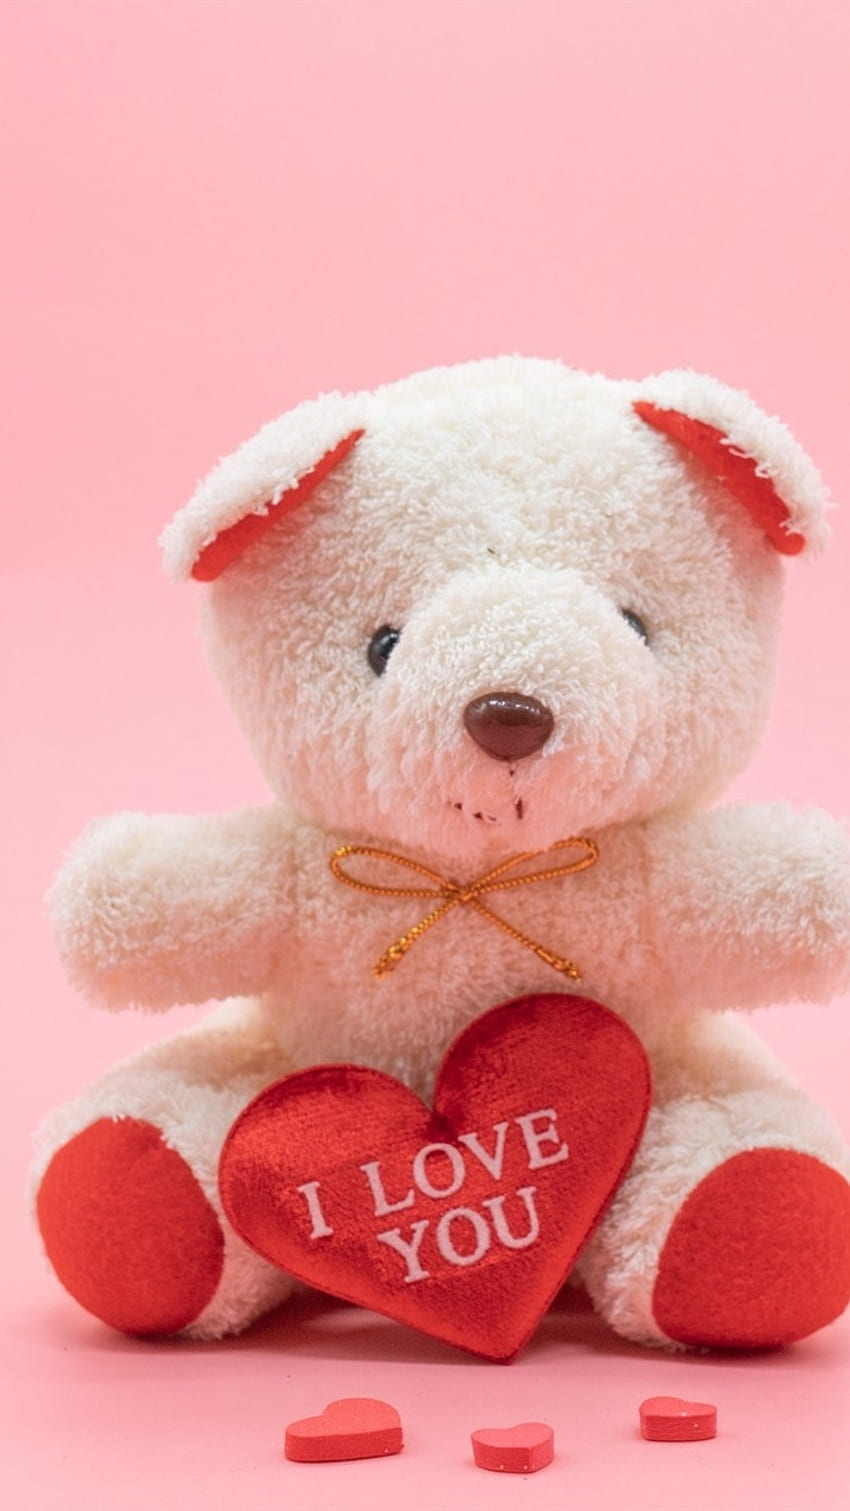 Wallpaper Teddy bear, toy, rope, love heart, black and white style  5120x2880 UHD 5K Picture, Image